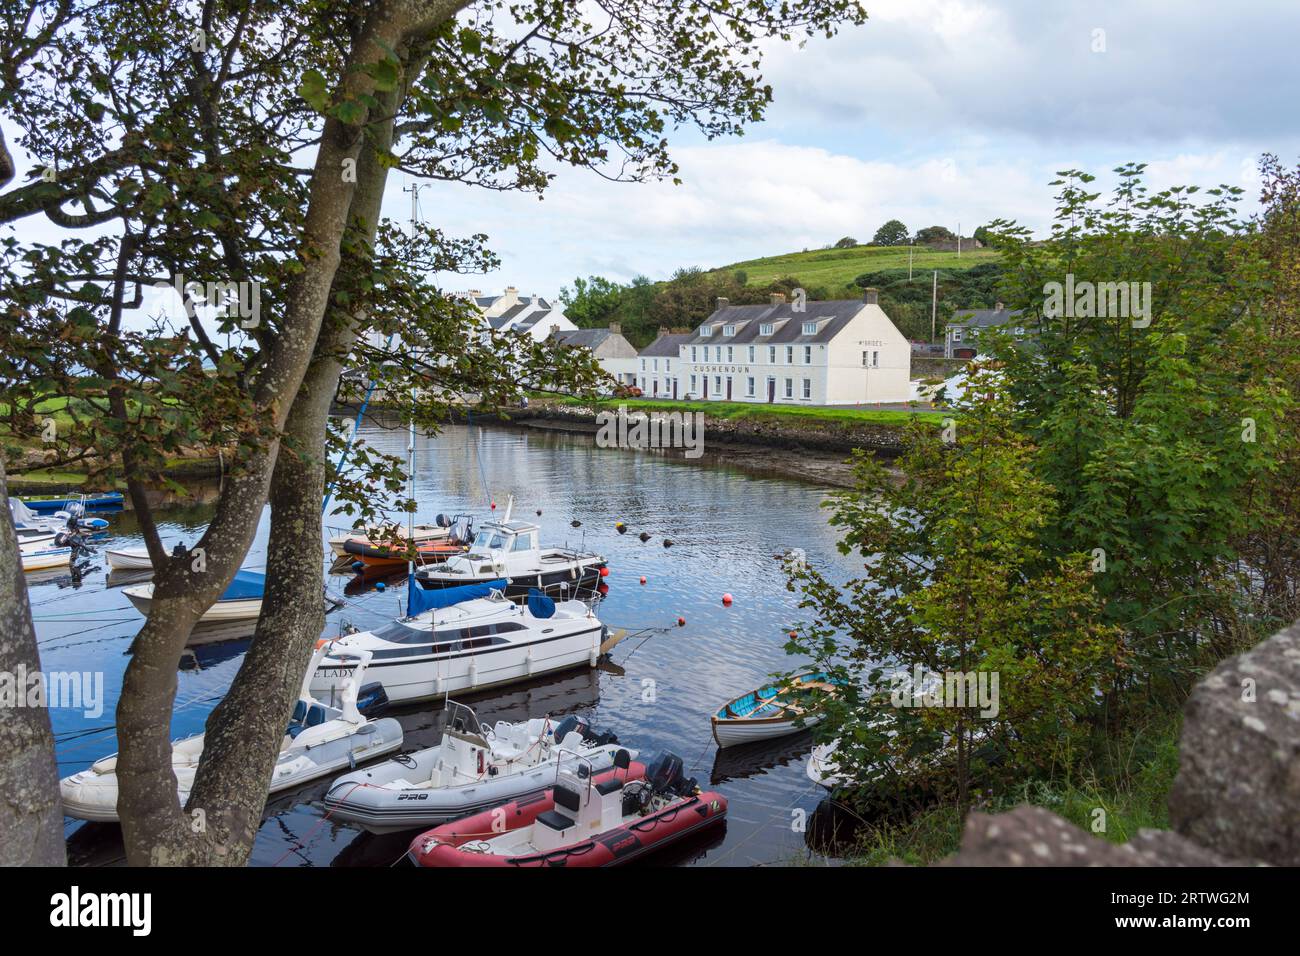 Cushendun is a small coastal village in County Antrim, Northern Ireland. It sits off the A2 coast road between Cushendall and Ballycastle. Stock Photo